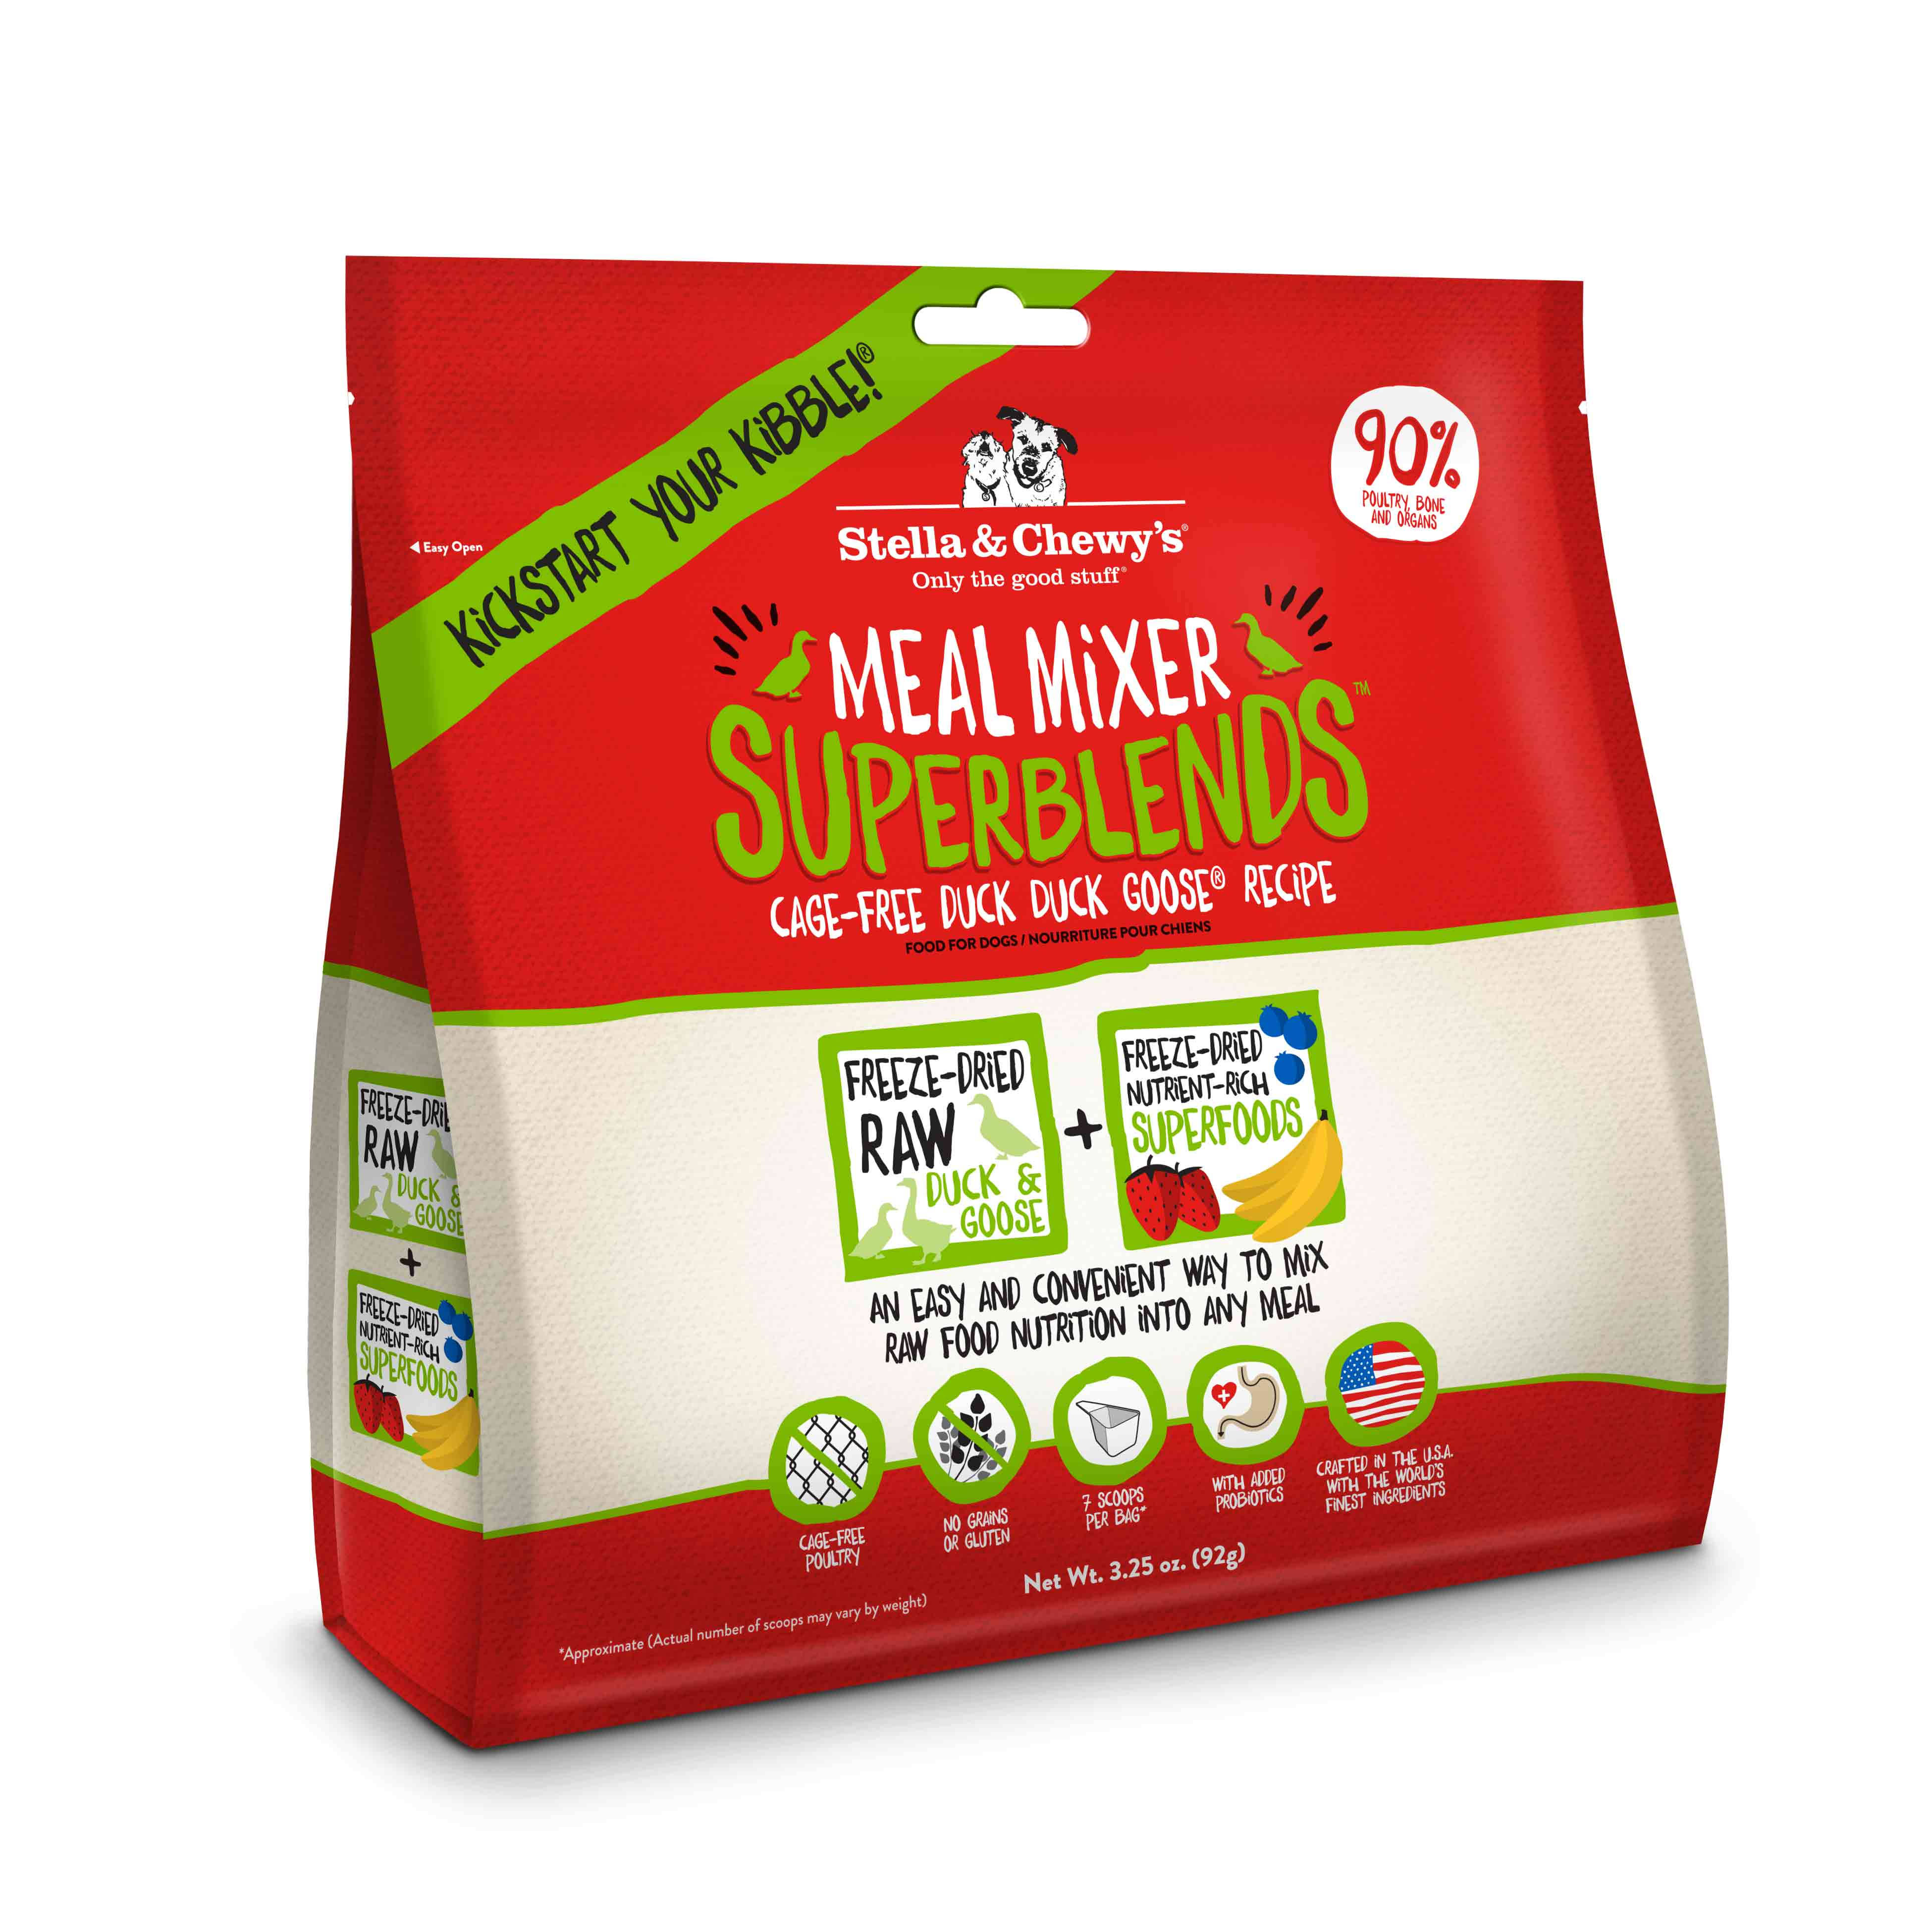 Stella and Chewy's Dried Meal Mixer Super Blends